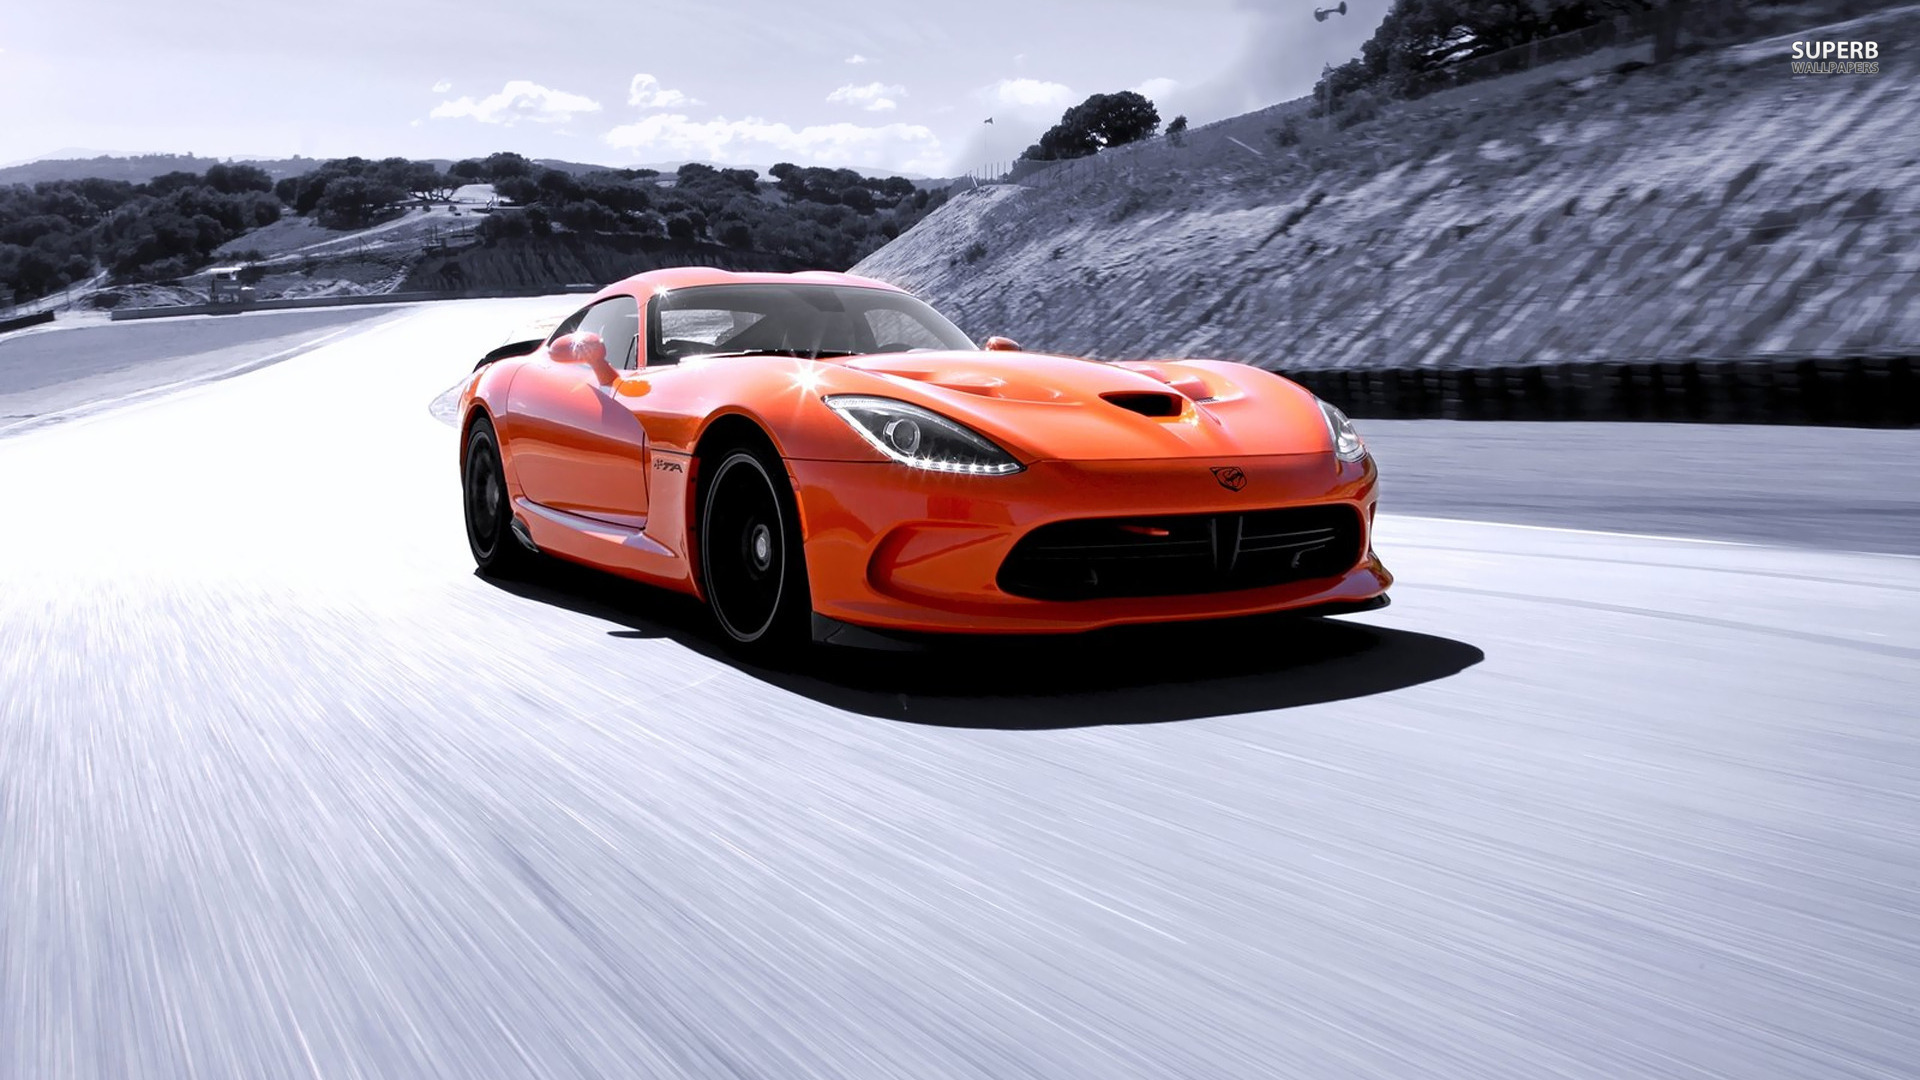 Gorgeous Dodge Viper Wallpaper Full HD Pictures